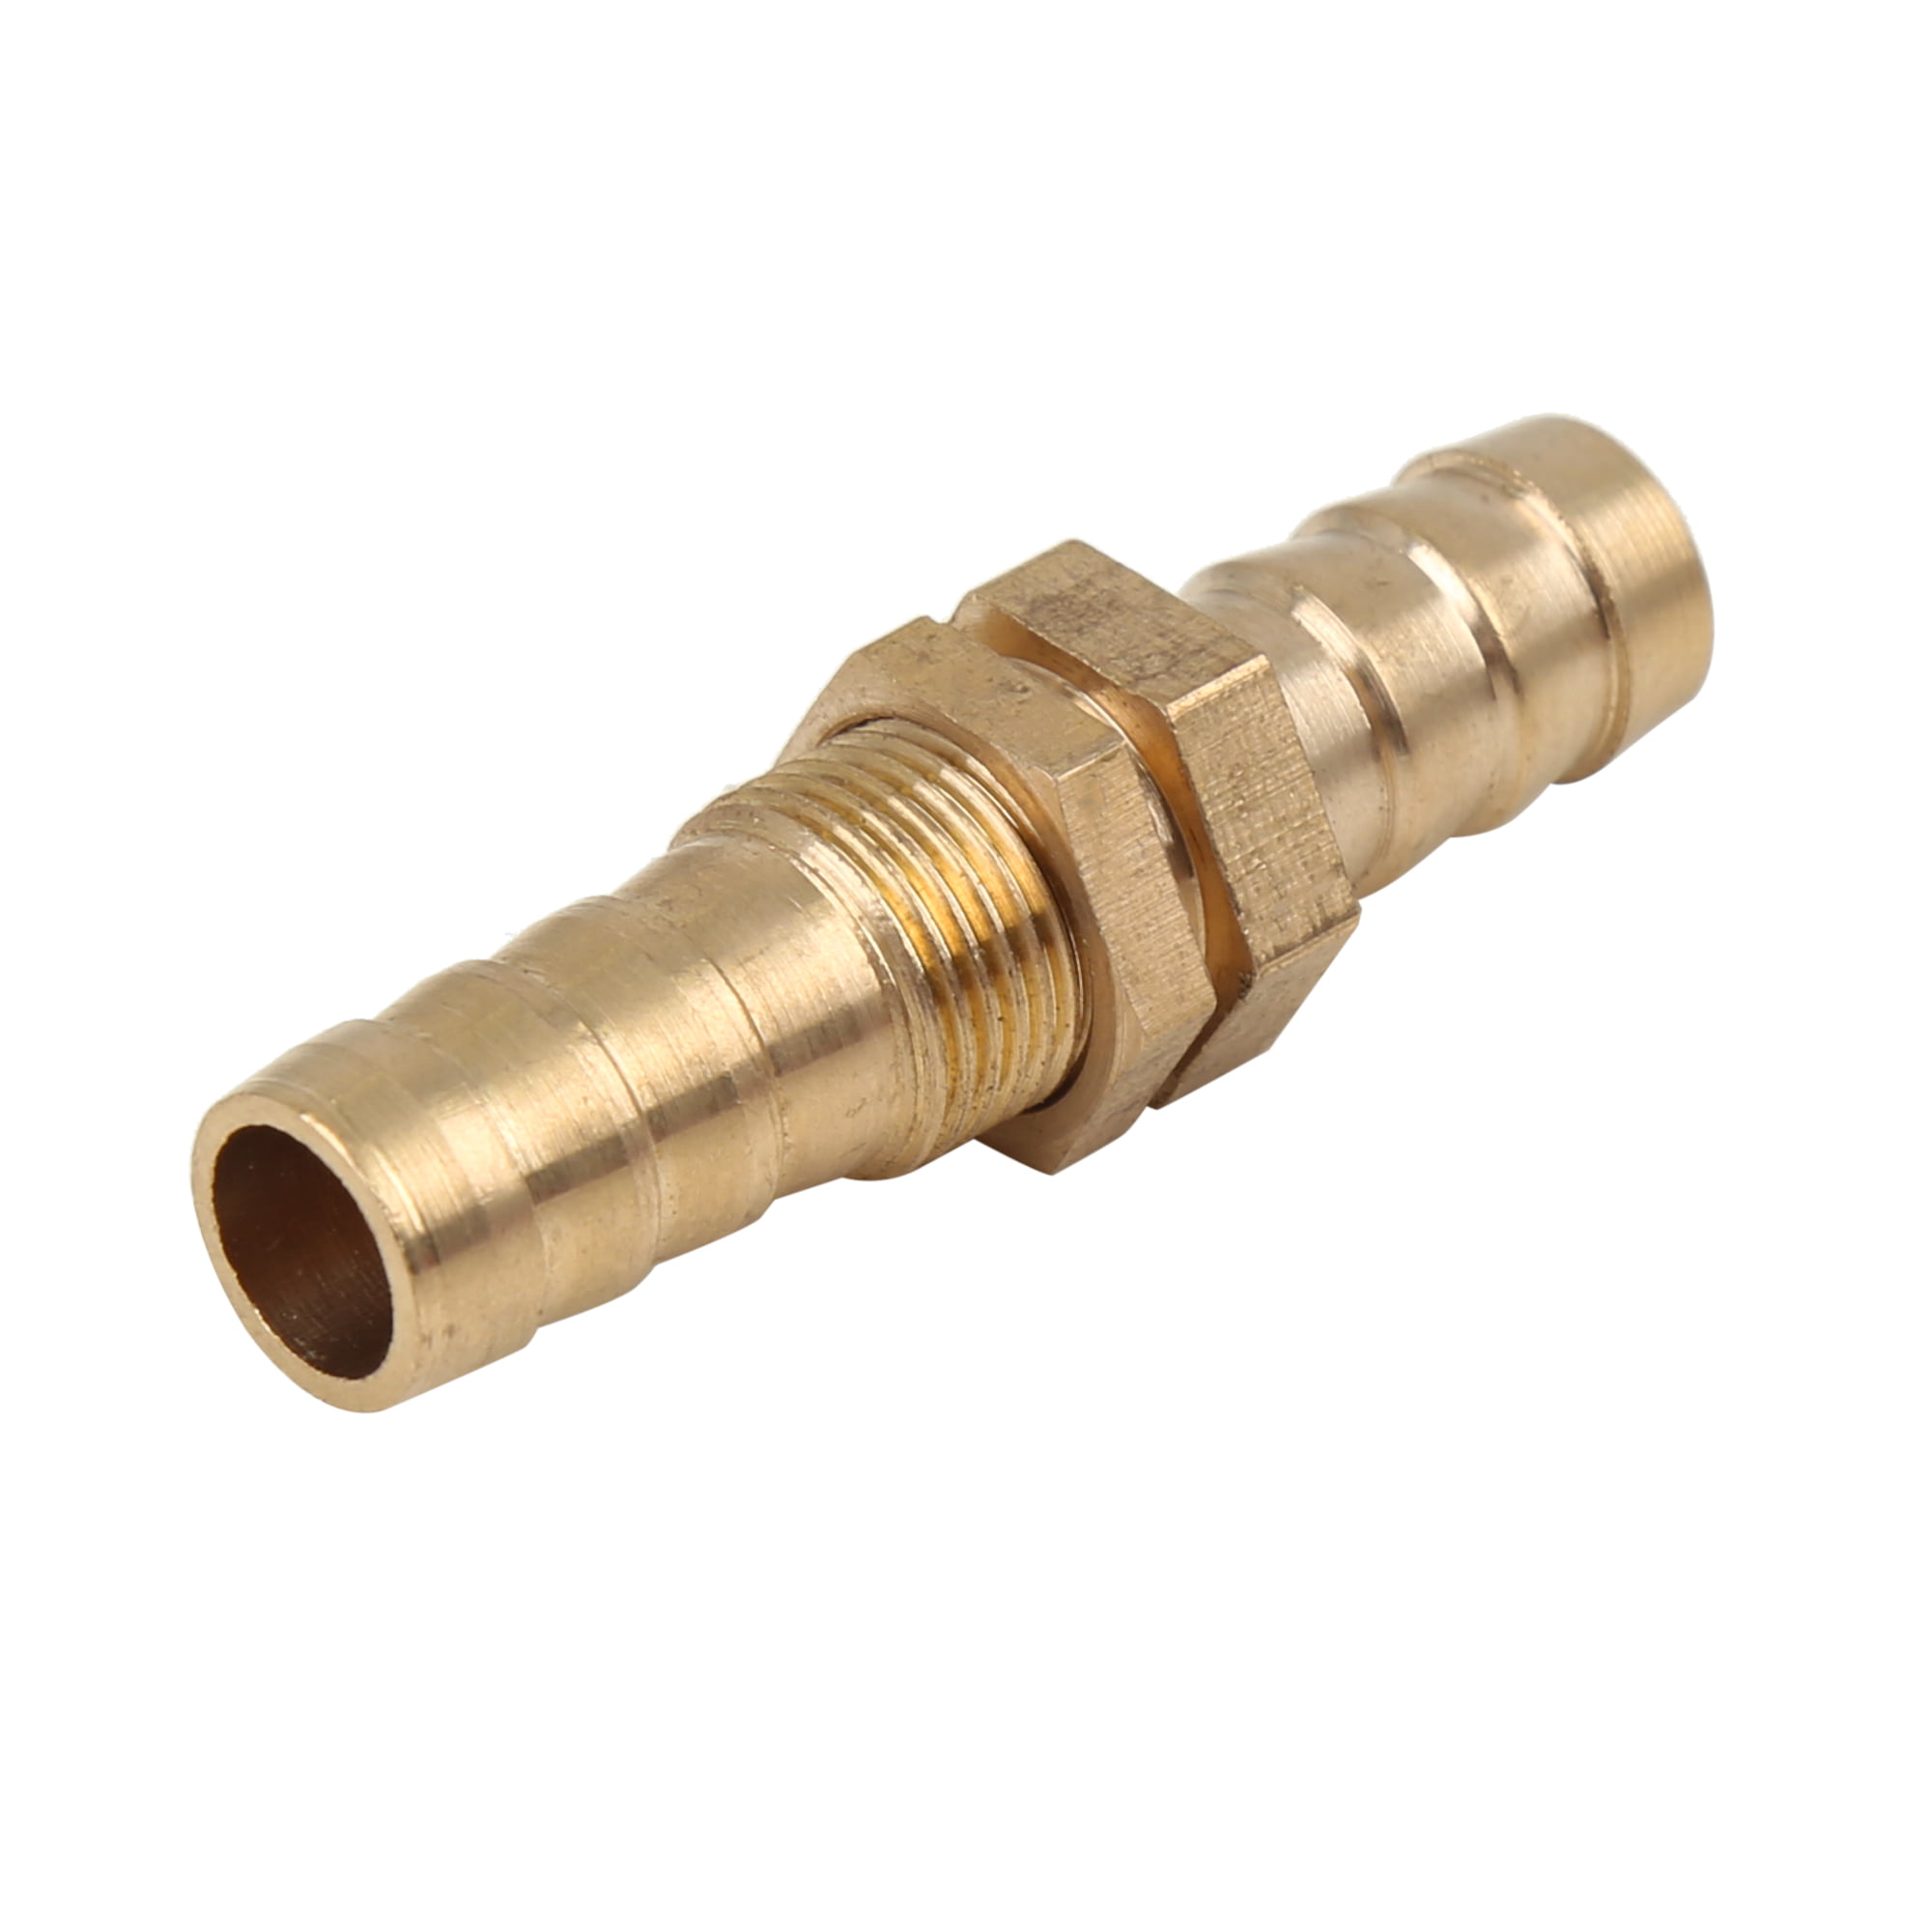 10mm Straight Brass Barbed Inline Joiner Connector Fuel Air Oil Gas Metal Tubing 